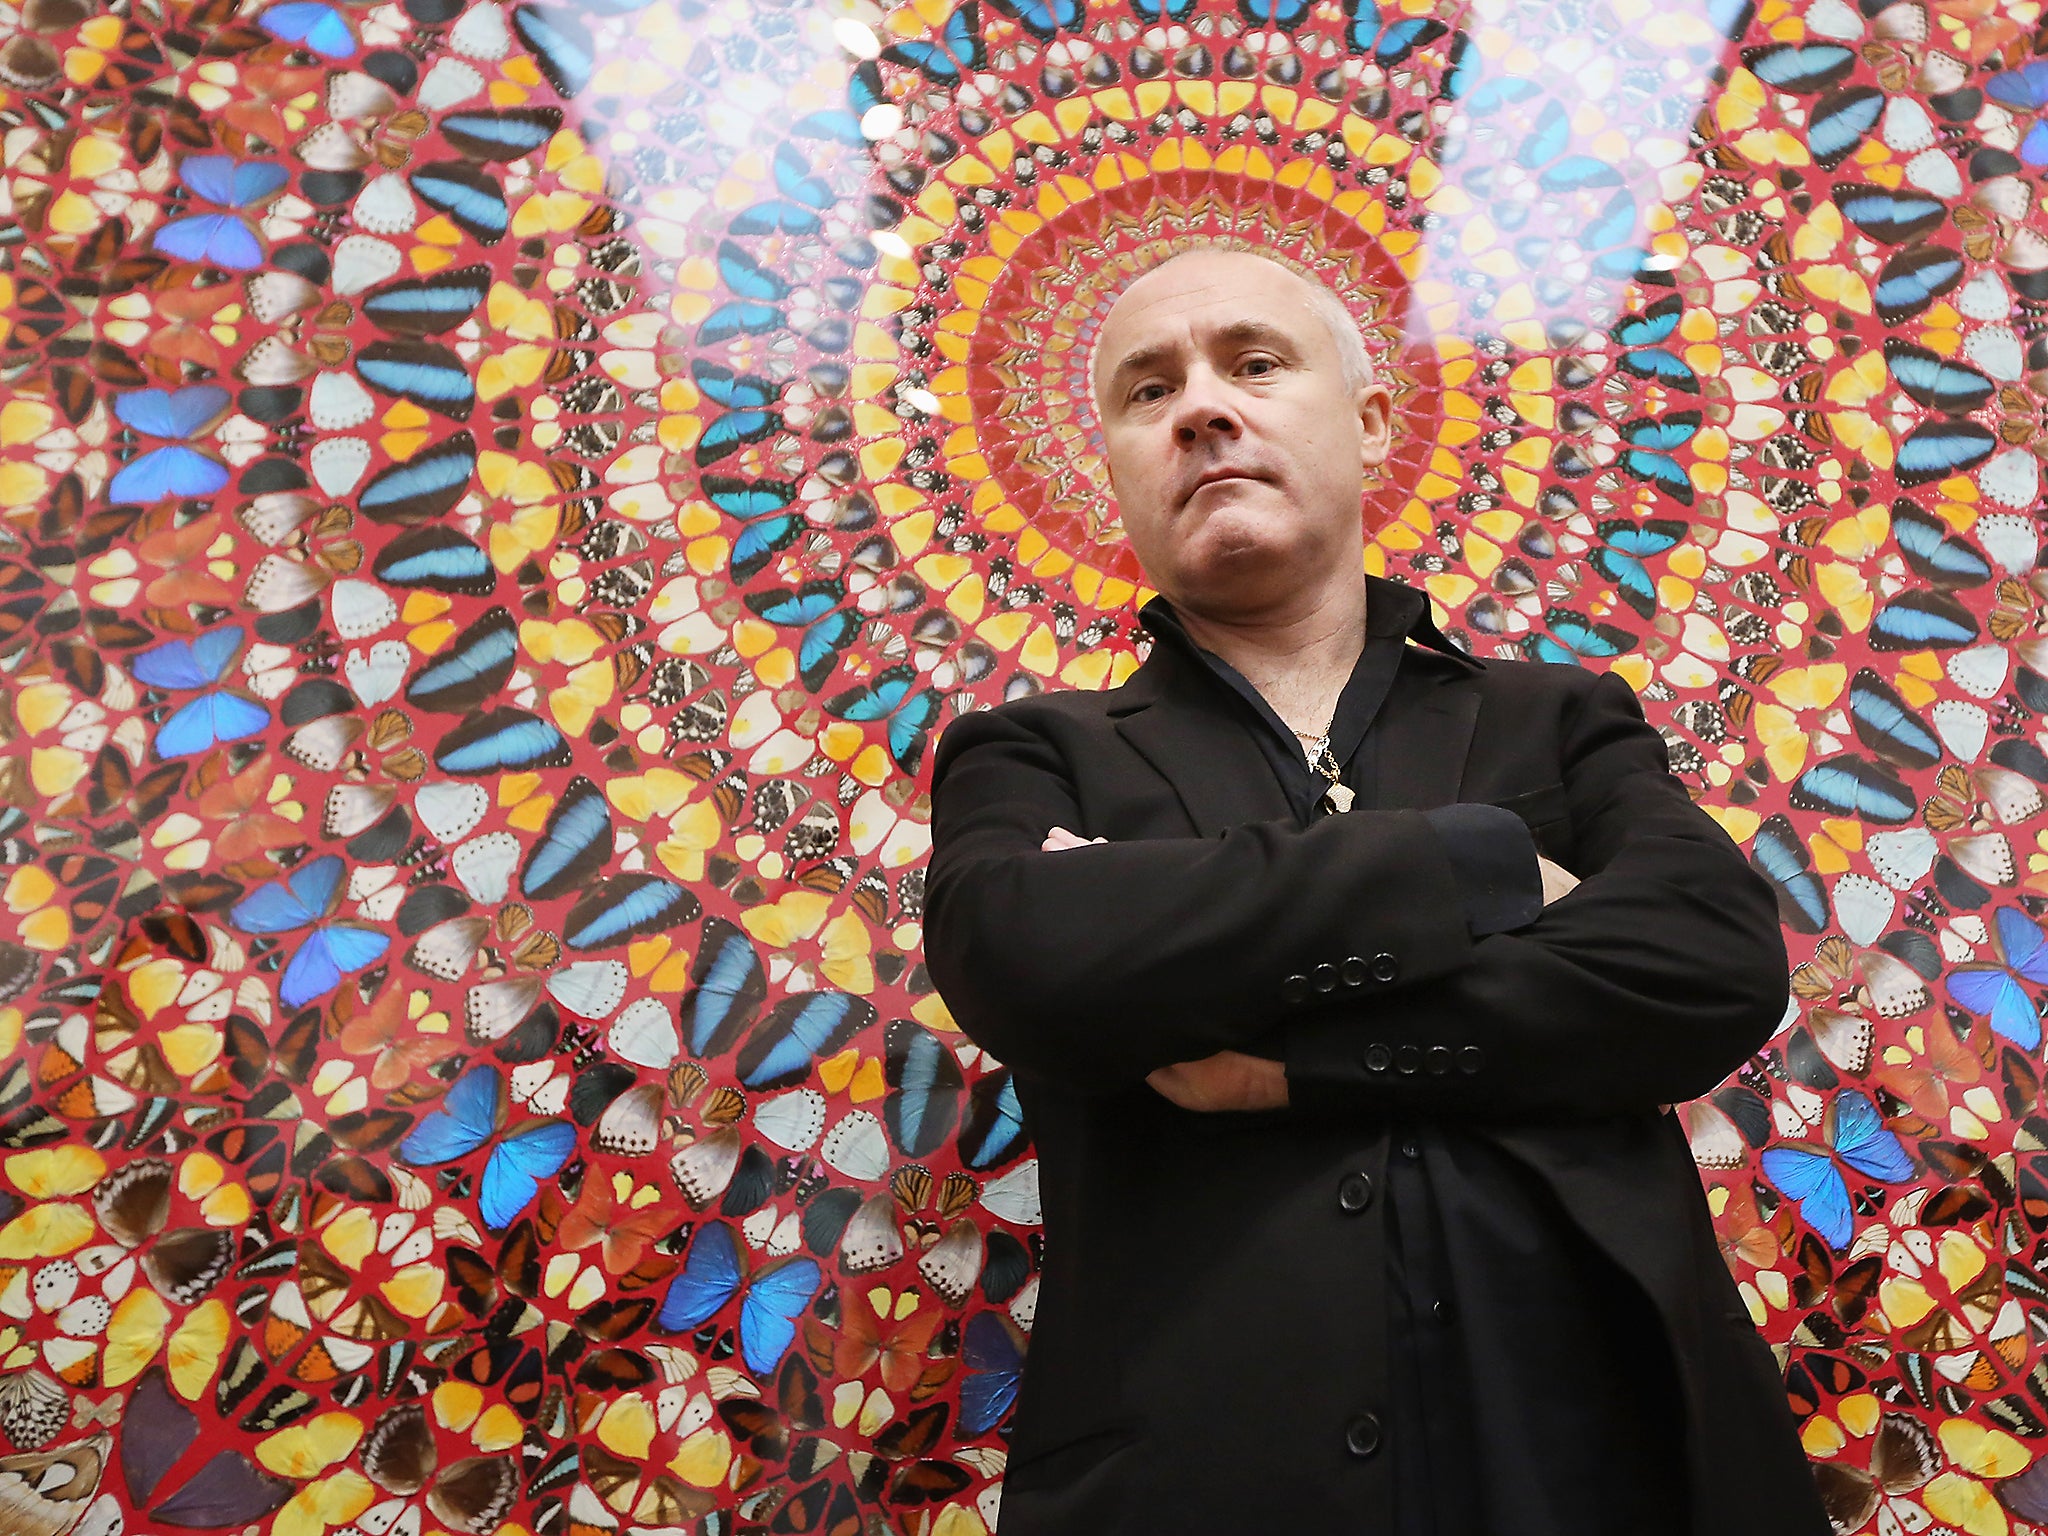 Damien Hirst collectors have seen his work drop in value since 2008